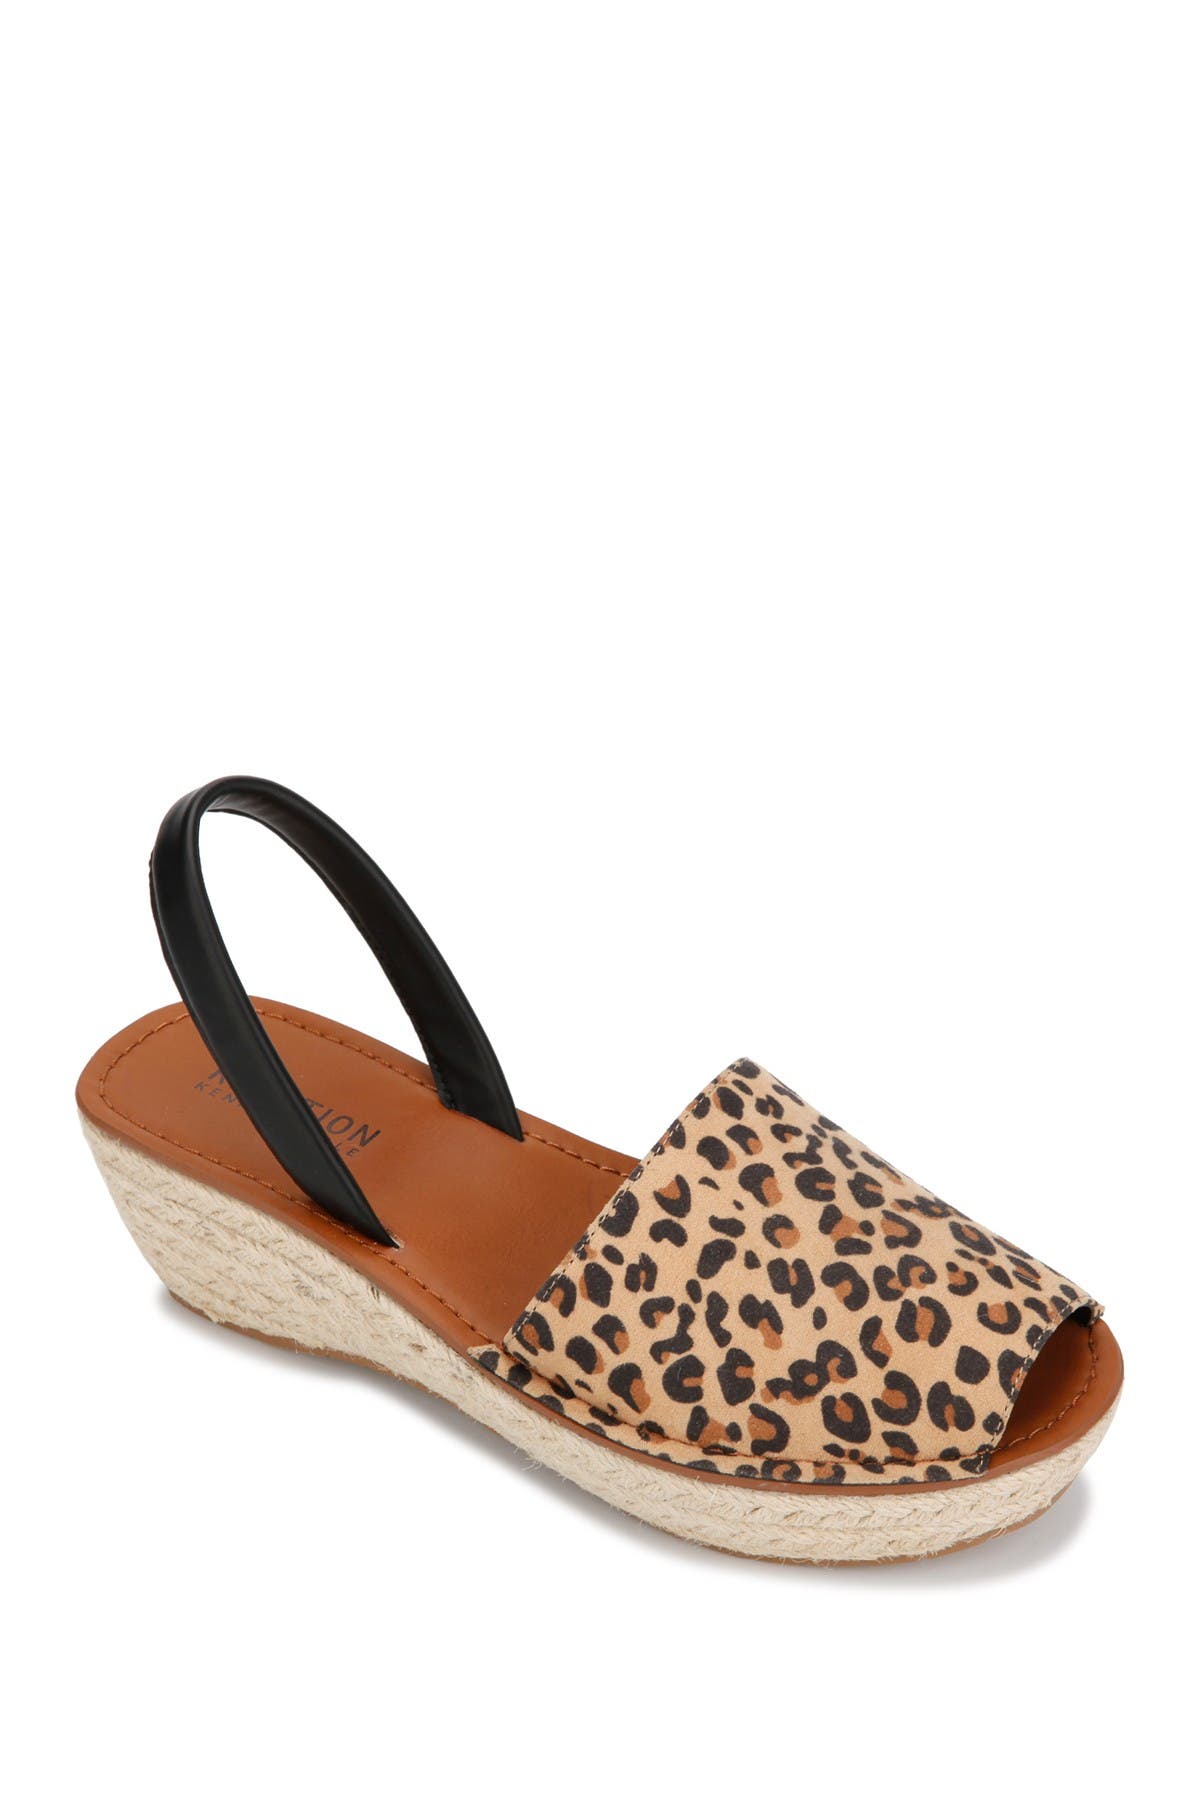 kenneth cole reaction leopard slip ons